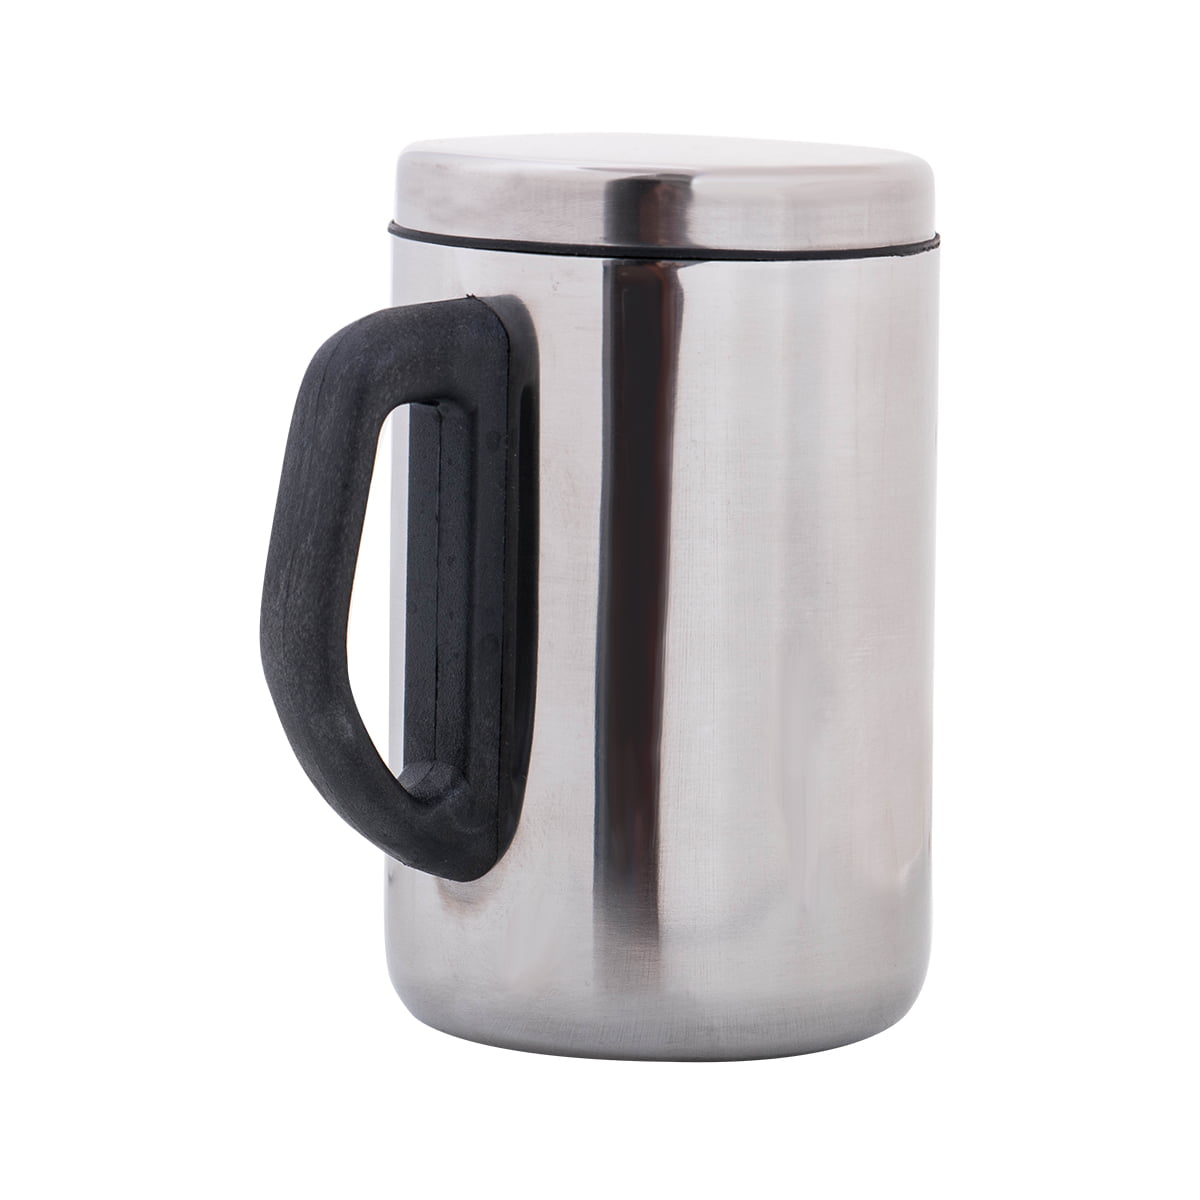 Details about   350/500ml Stainless Steel Mini Cup Mug Drinking Coffee Beer Wine Camping Travel 